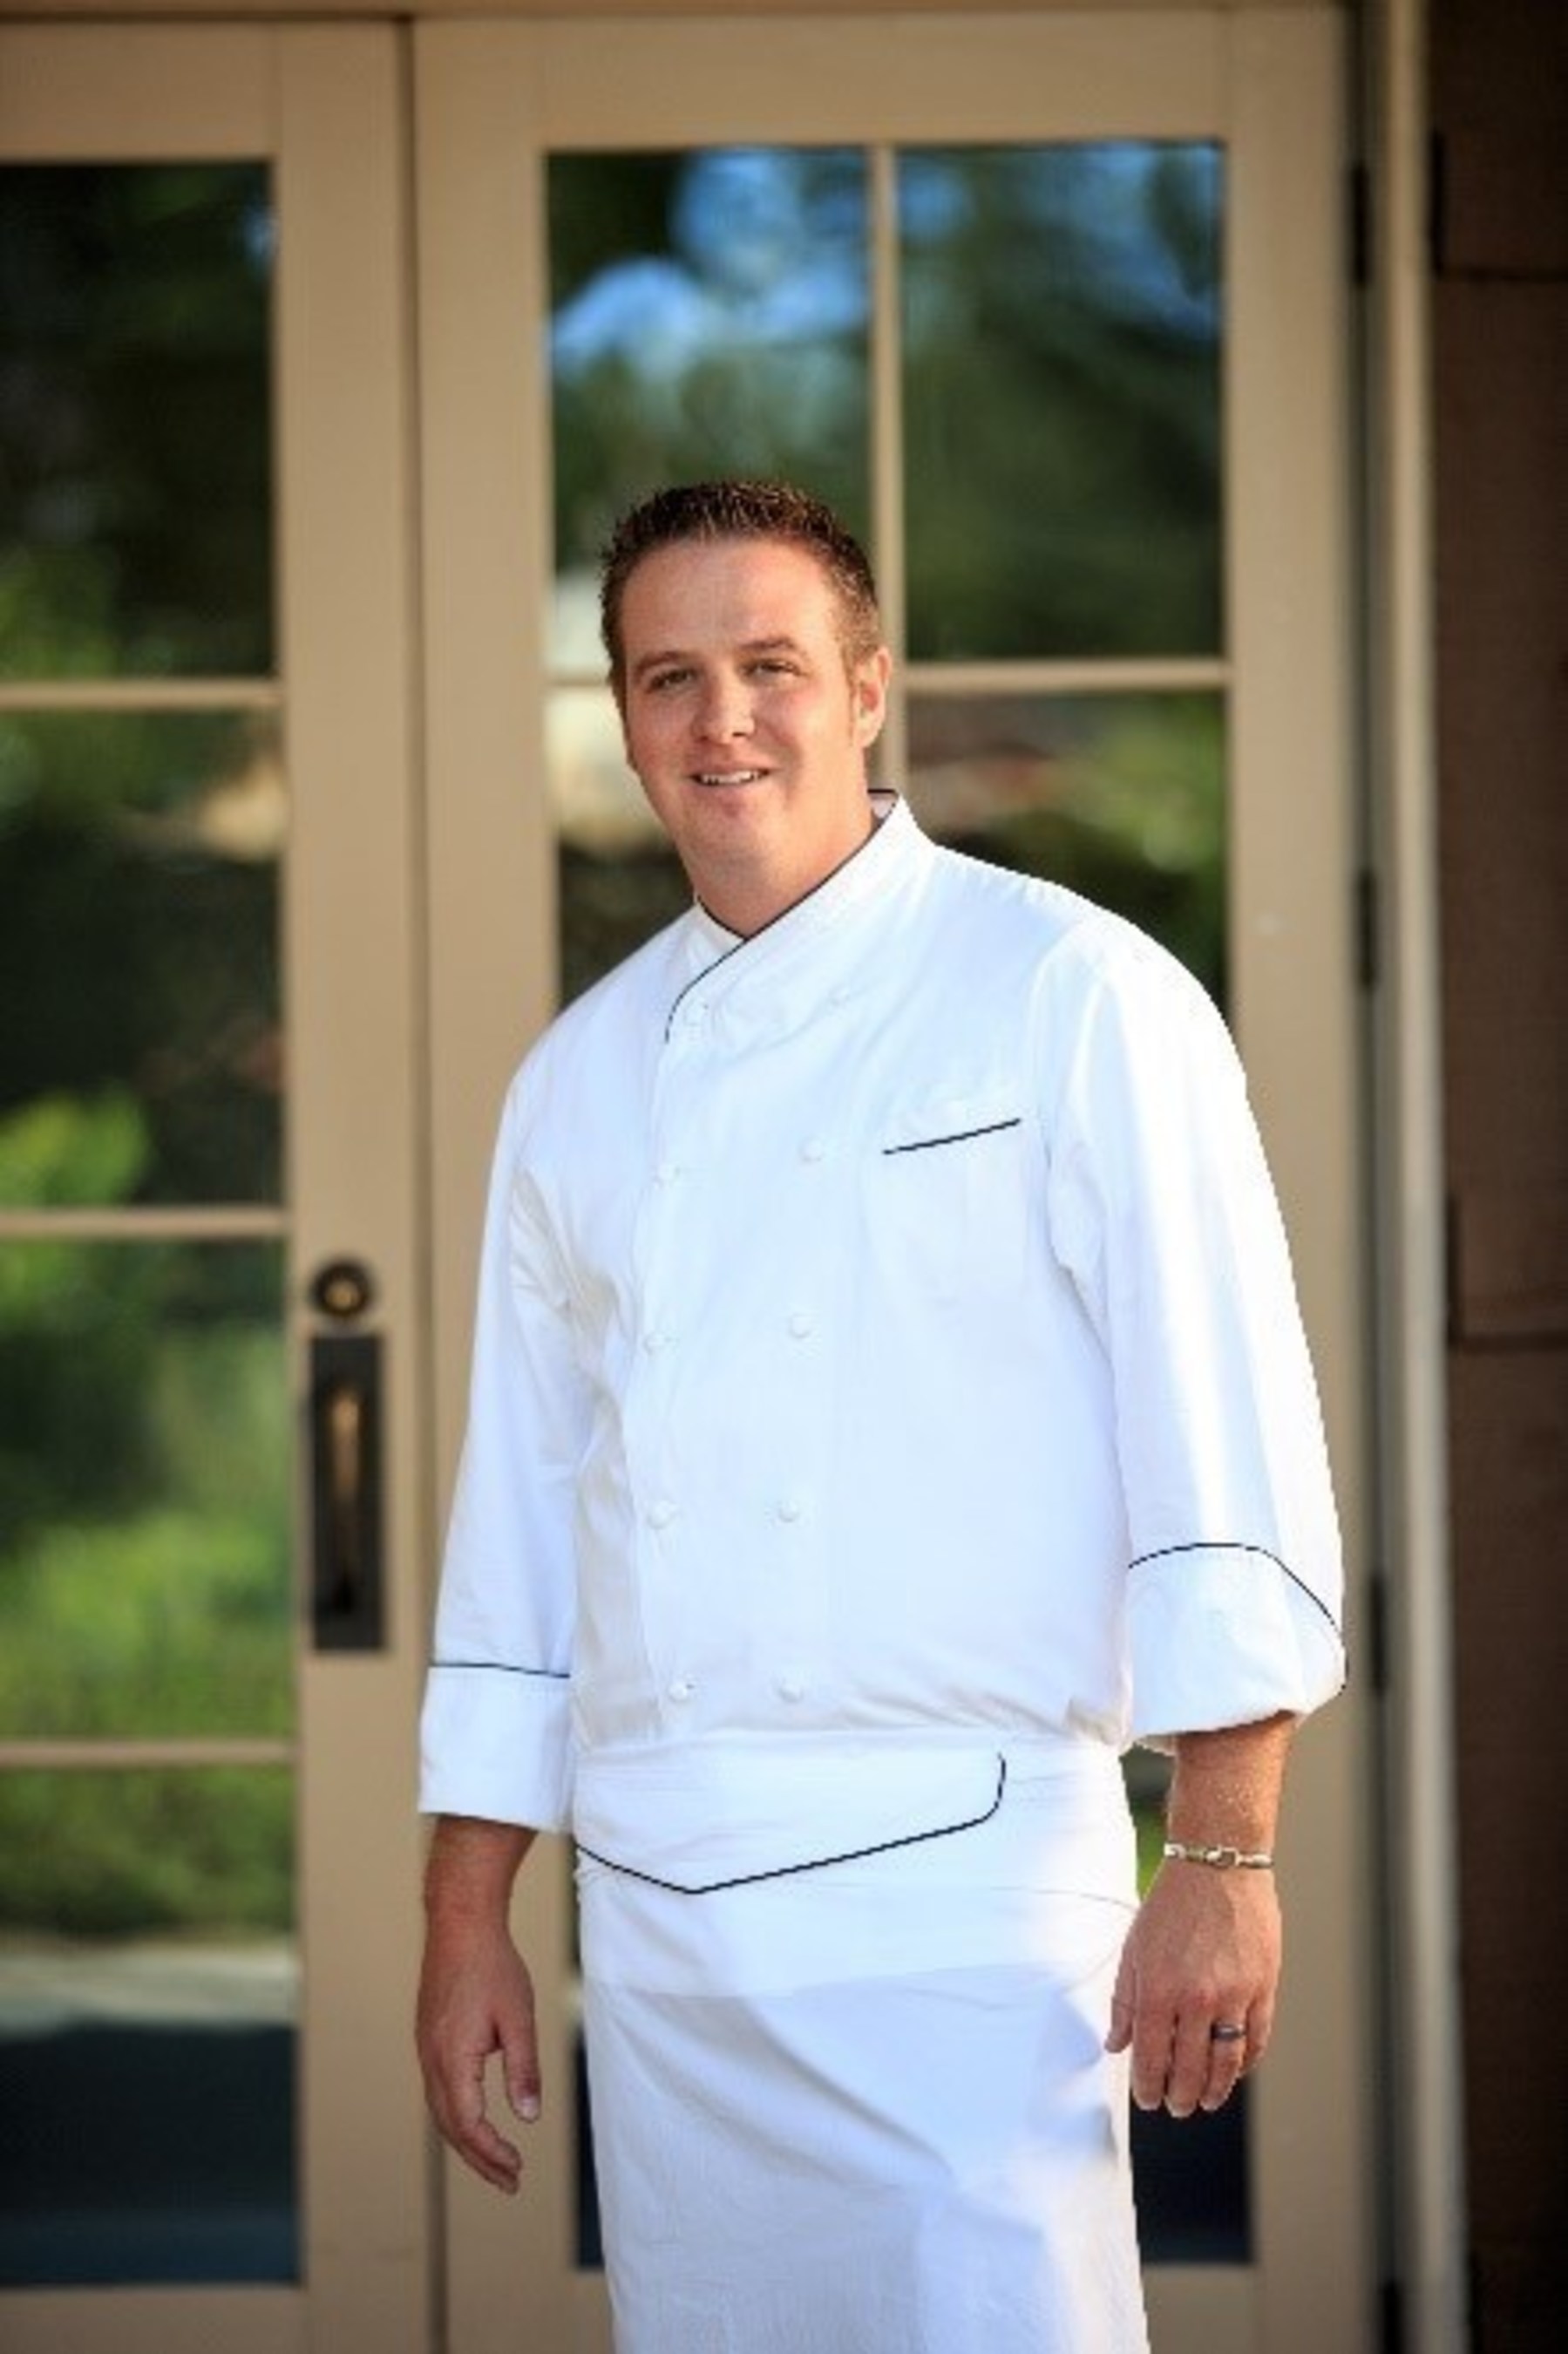 Joshua Murray has been named the new executive chef at Carneros Bistro, the award-winning restaurant at The Lodge at Sonoma Renaissance Resort & Spa. Murray joined Marriott in 2006 and worked at hotel restaurants in Chantilly, VA; Fort Lauderdale, FL; and Palm Desert, CA before arriving in Sonoma. Carneros Bistro specializes in farm-to-table cuisine for breakfast, brunch, lunch and dinner and boasts a vast organic garden where fresh herbs and produce are grown for seasonal dishes. For information, visit www.marriott.com/SFOLS or call 1-707-935-6600.